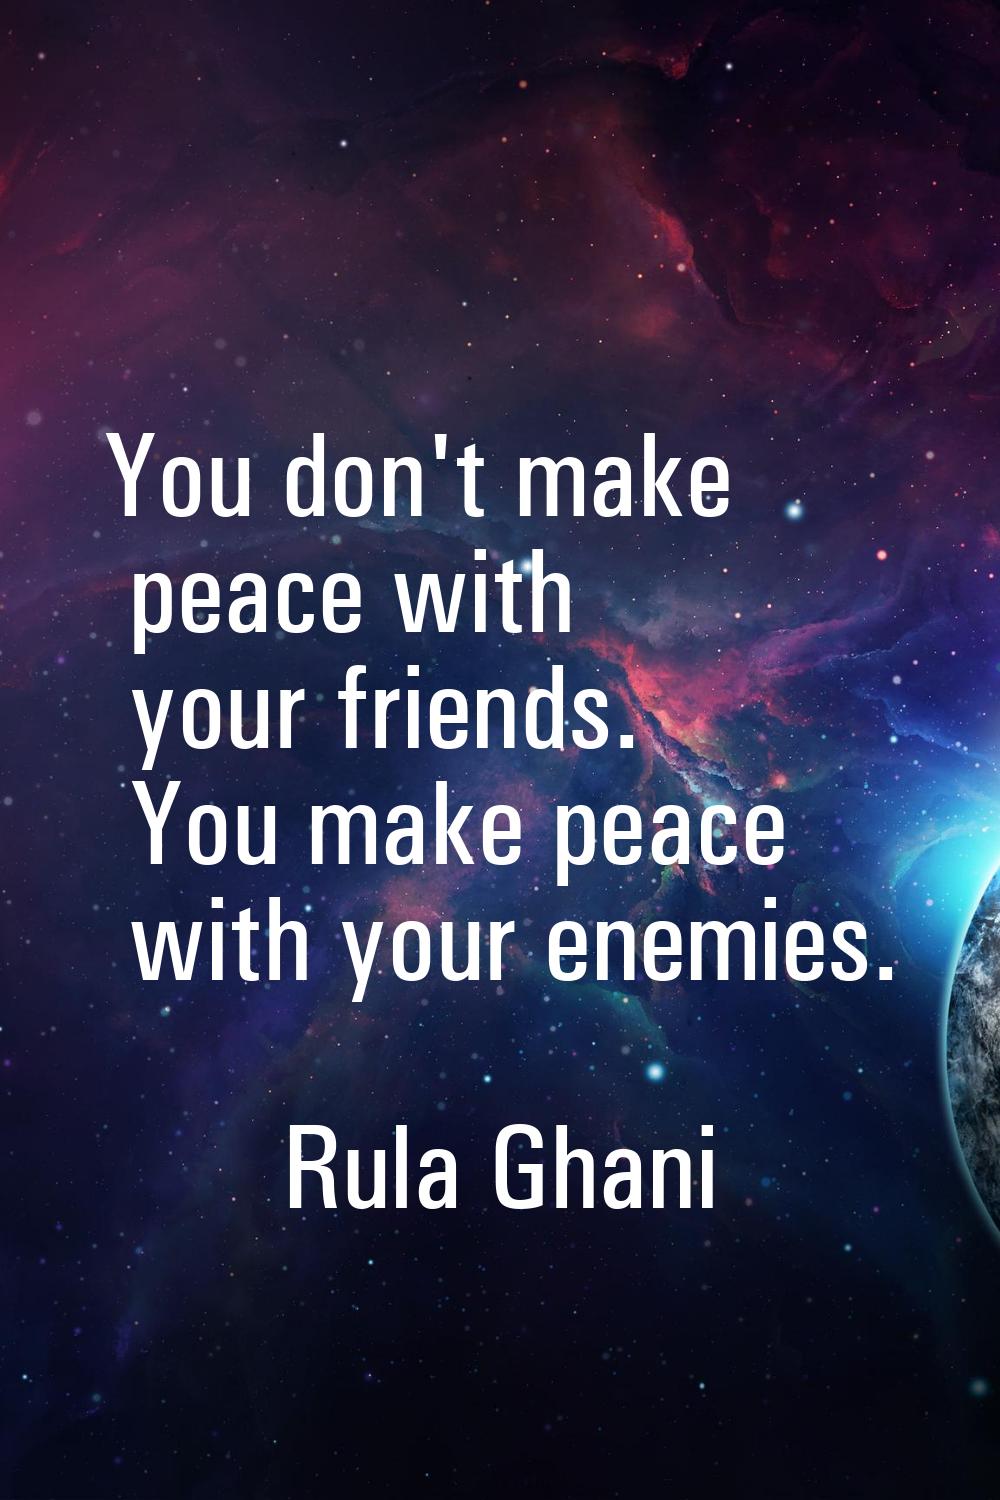 You don't make peace with your friends. You make peace with your enemies.